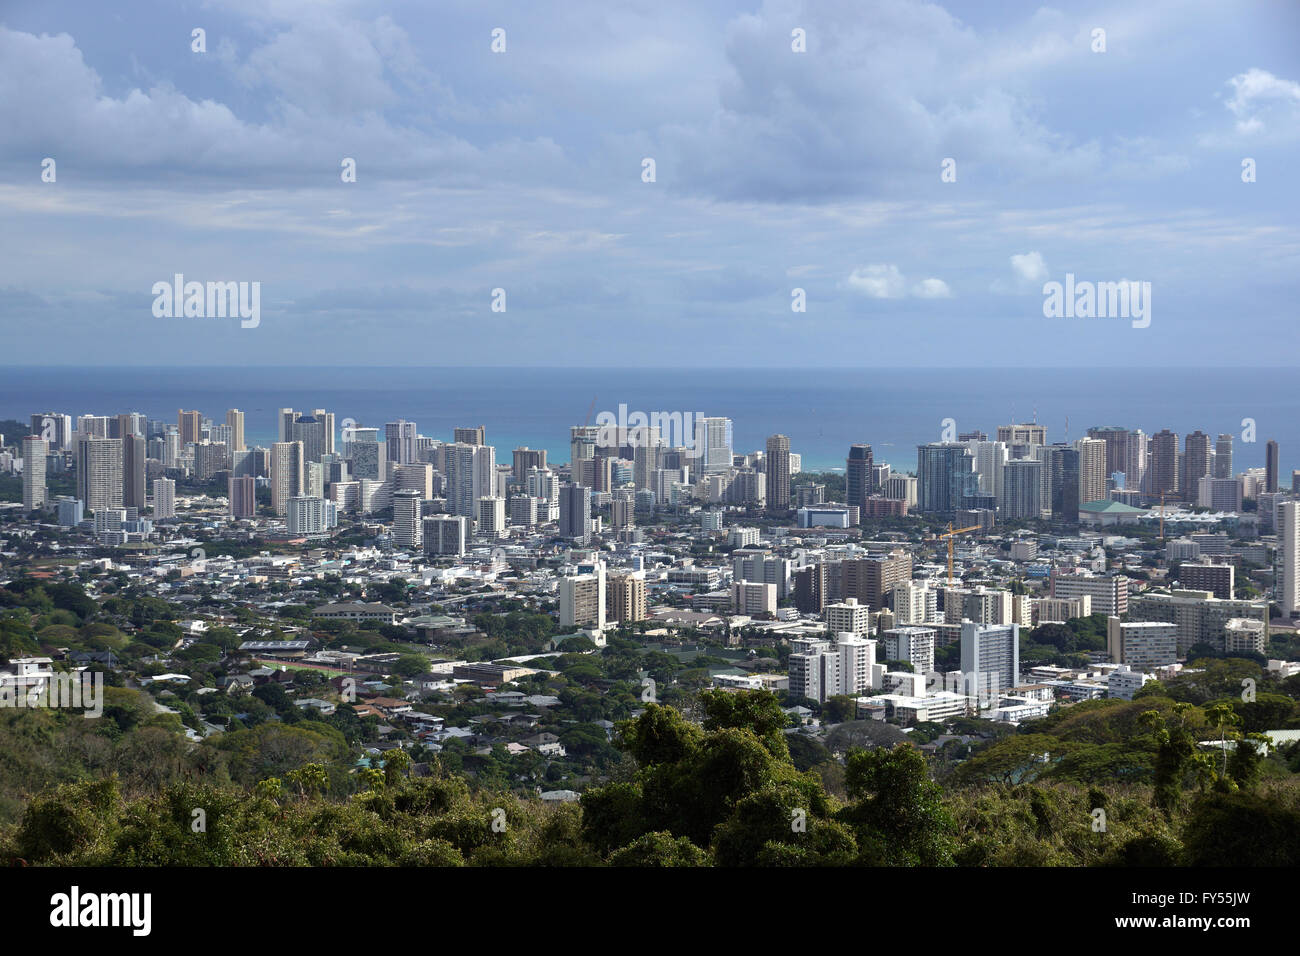 Honolulu cityscape, roads, buildings, skyscrapers, cranes, parks, and Pacific Ocean with clouds in the sky seen from up in the m Stock Photo